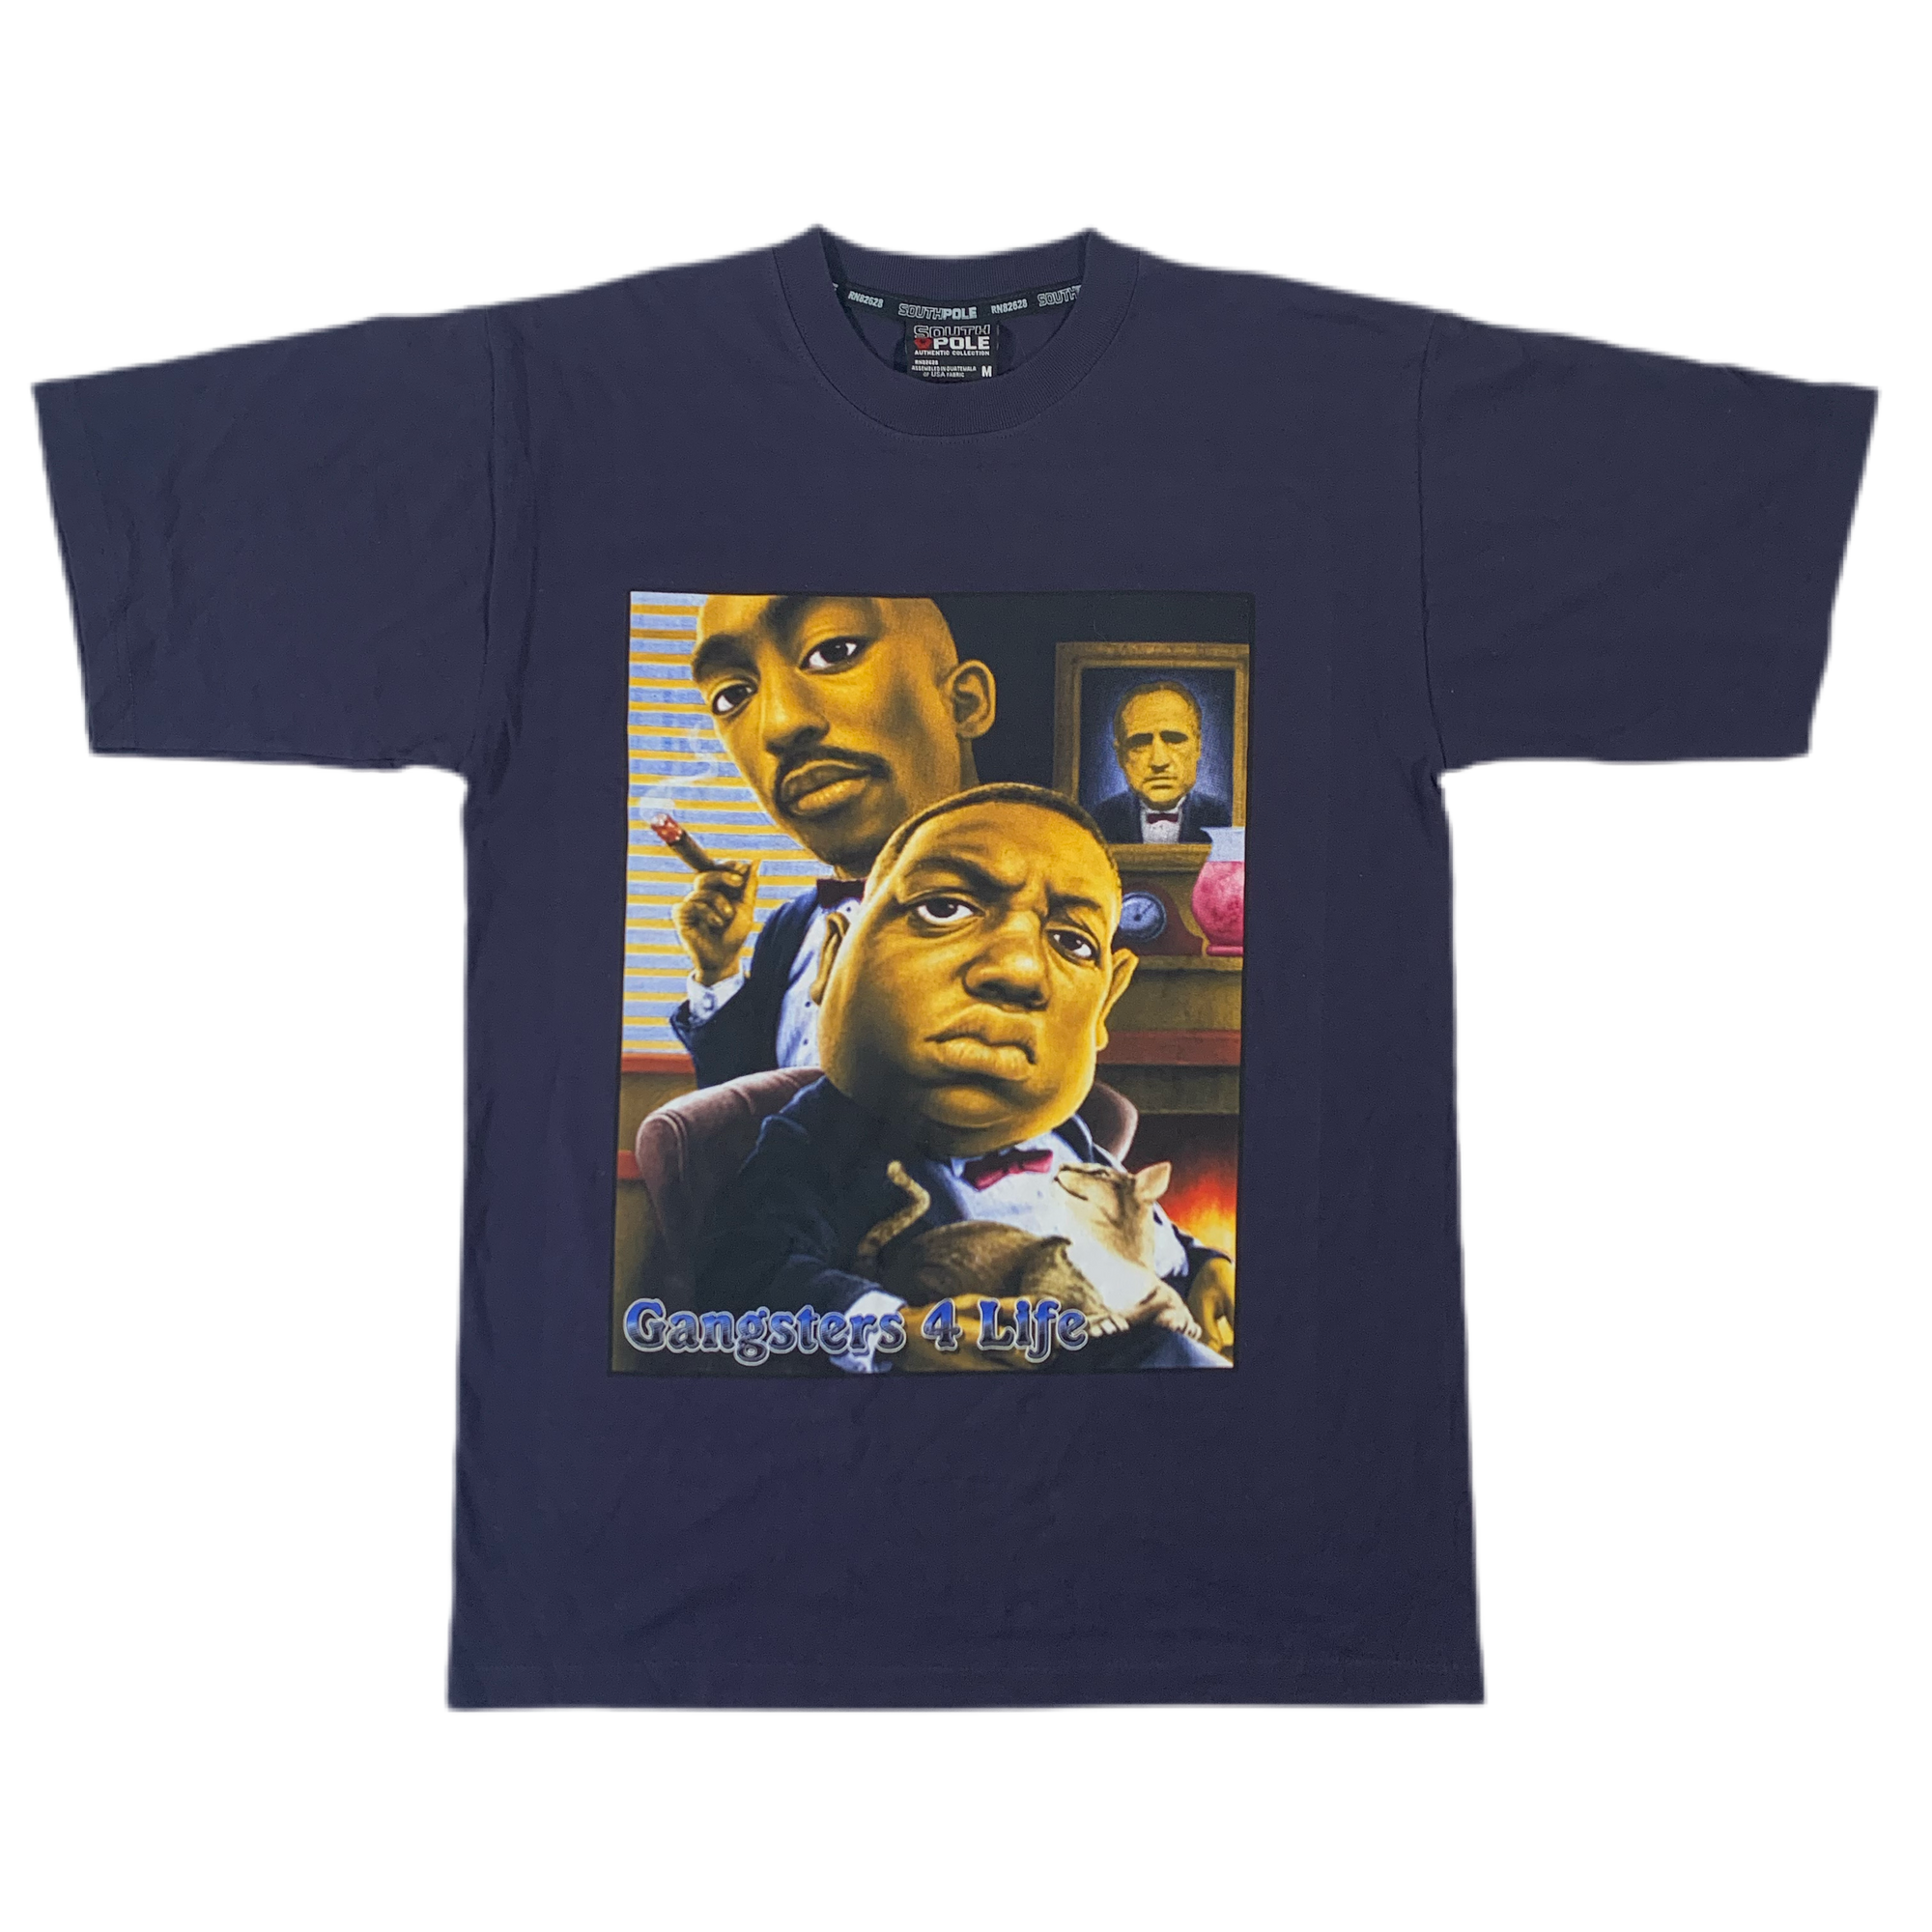 Vintage 2Pac & Notorious B.I.G Gangsters 4 Life T-Shirt